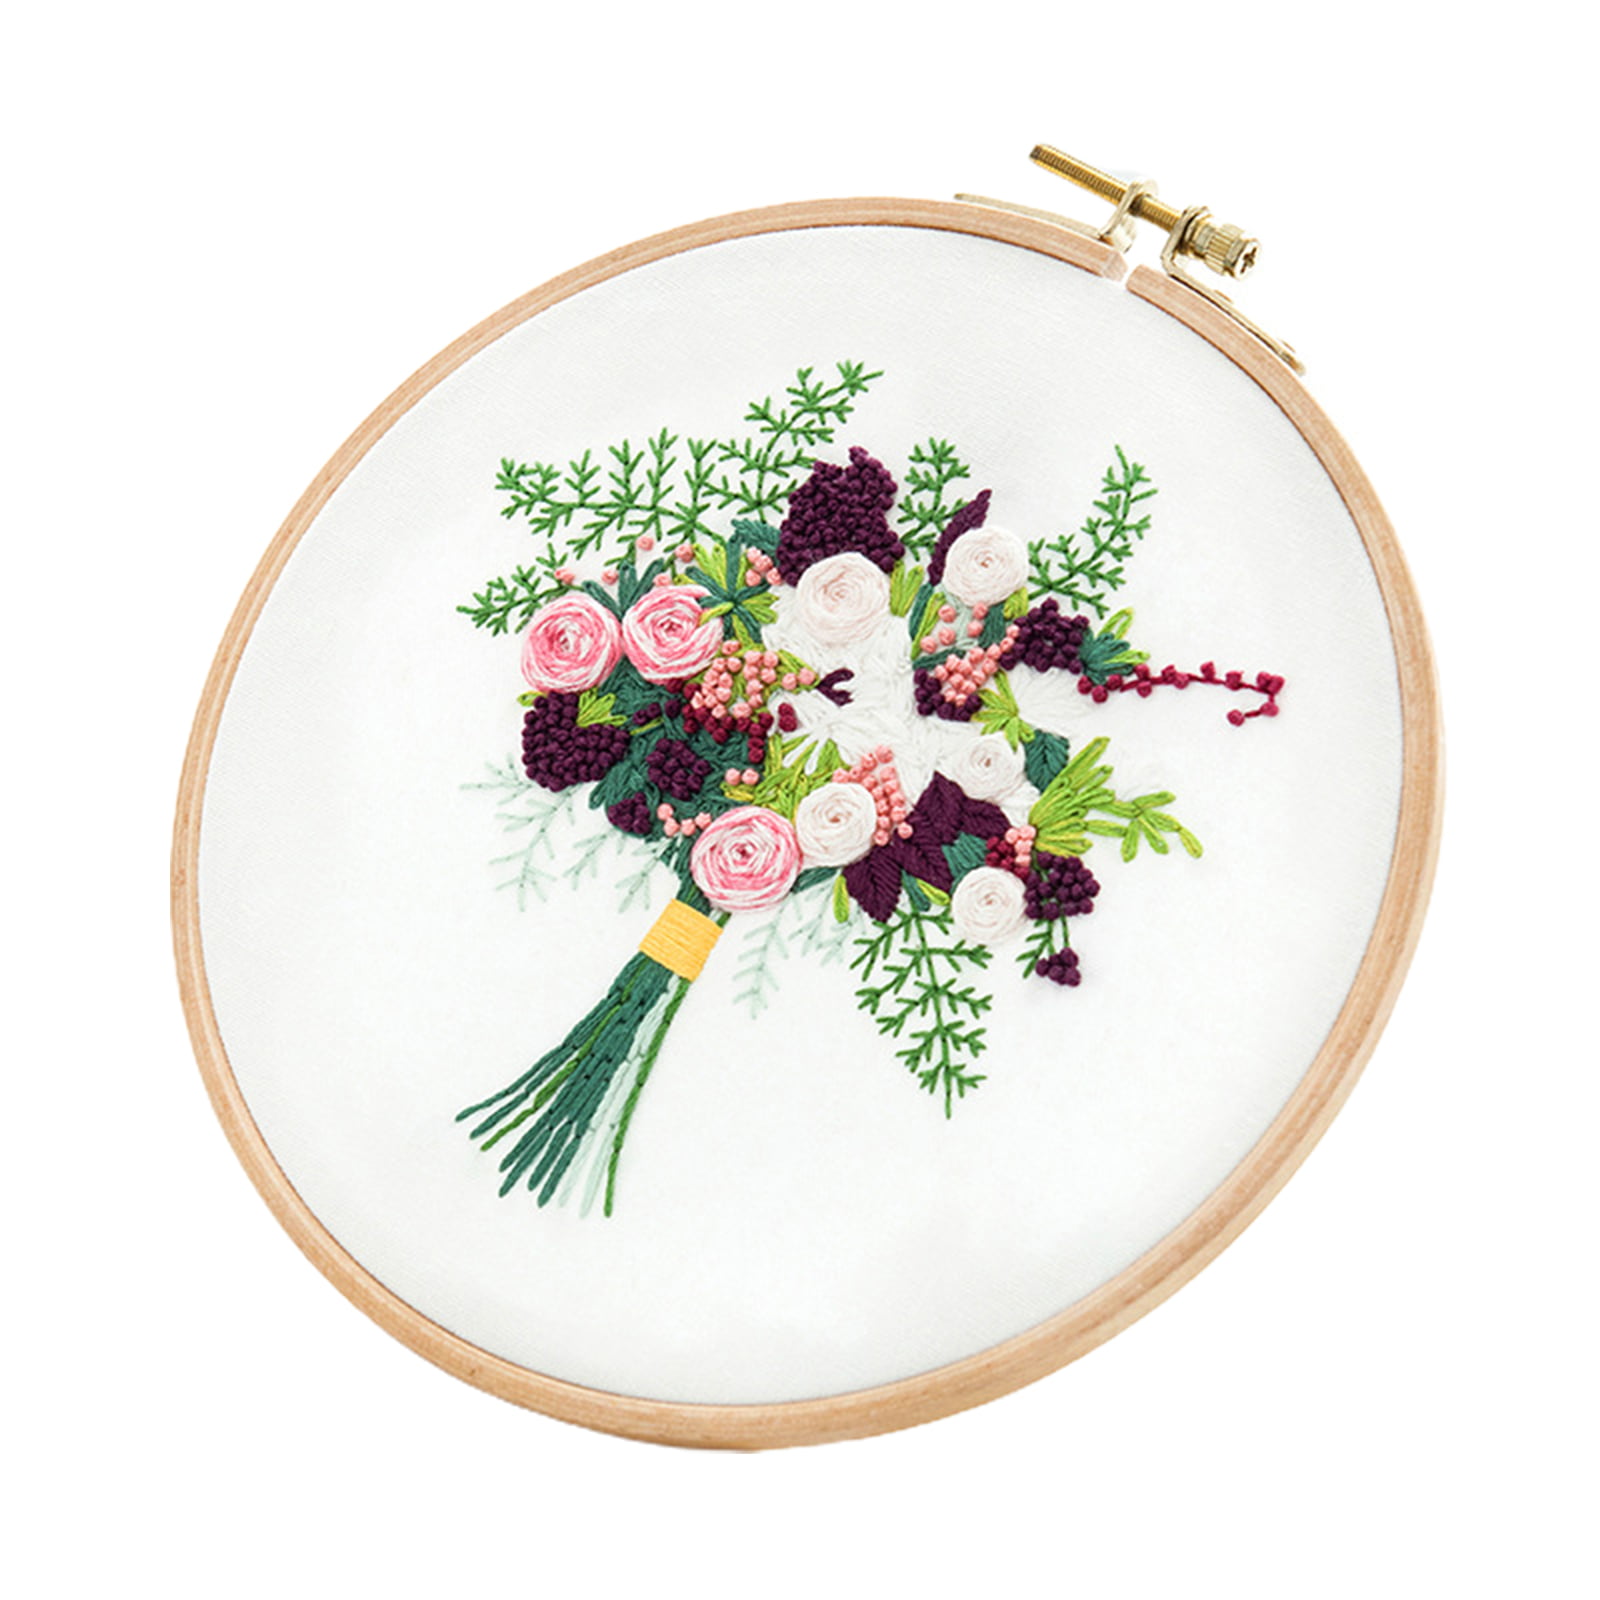 DIY Bouquet Series Embroidery Kit Flowers Plants Pattern Cross Stitch Kits  With Embroidery Hoops For Thanksgiving Mother Day - AliExpress